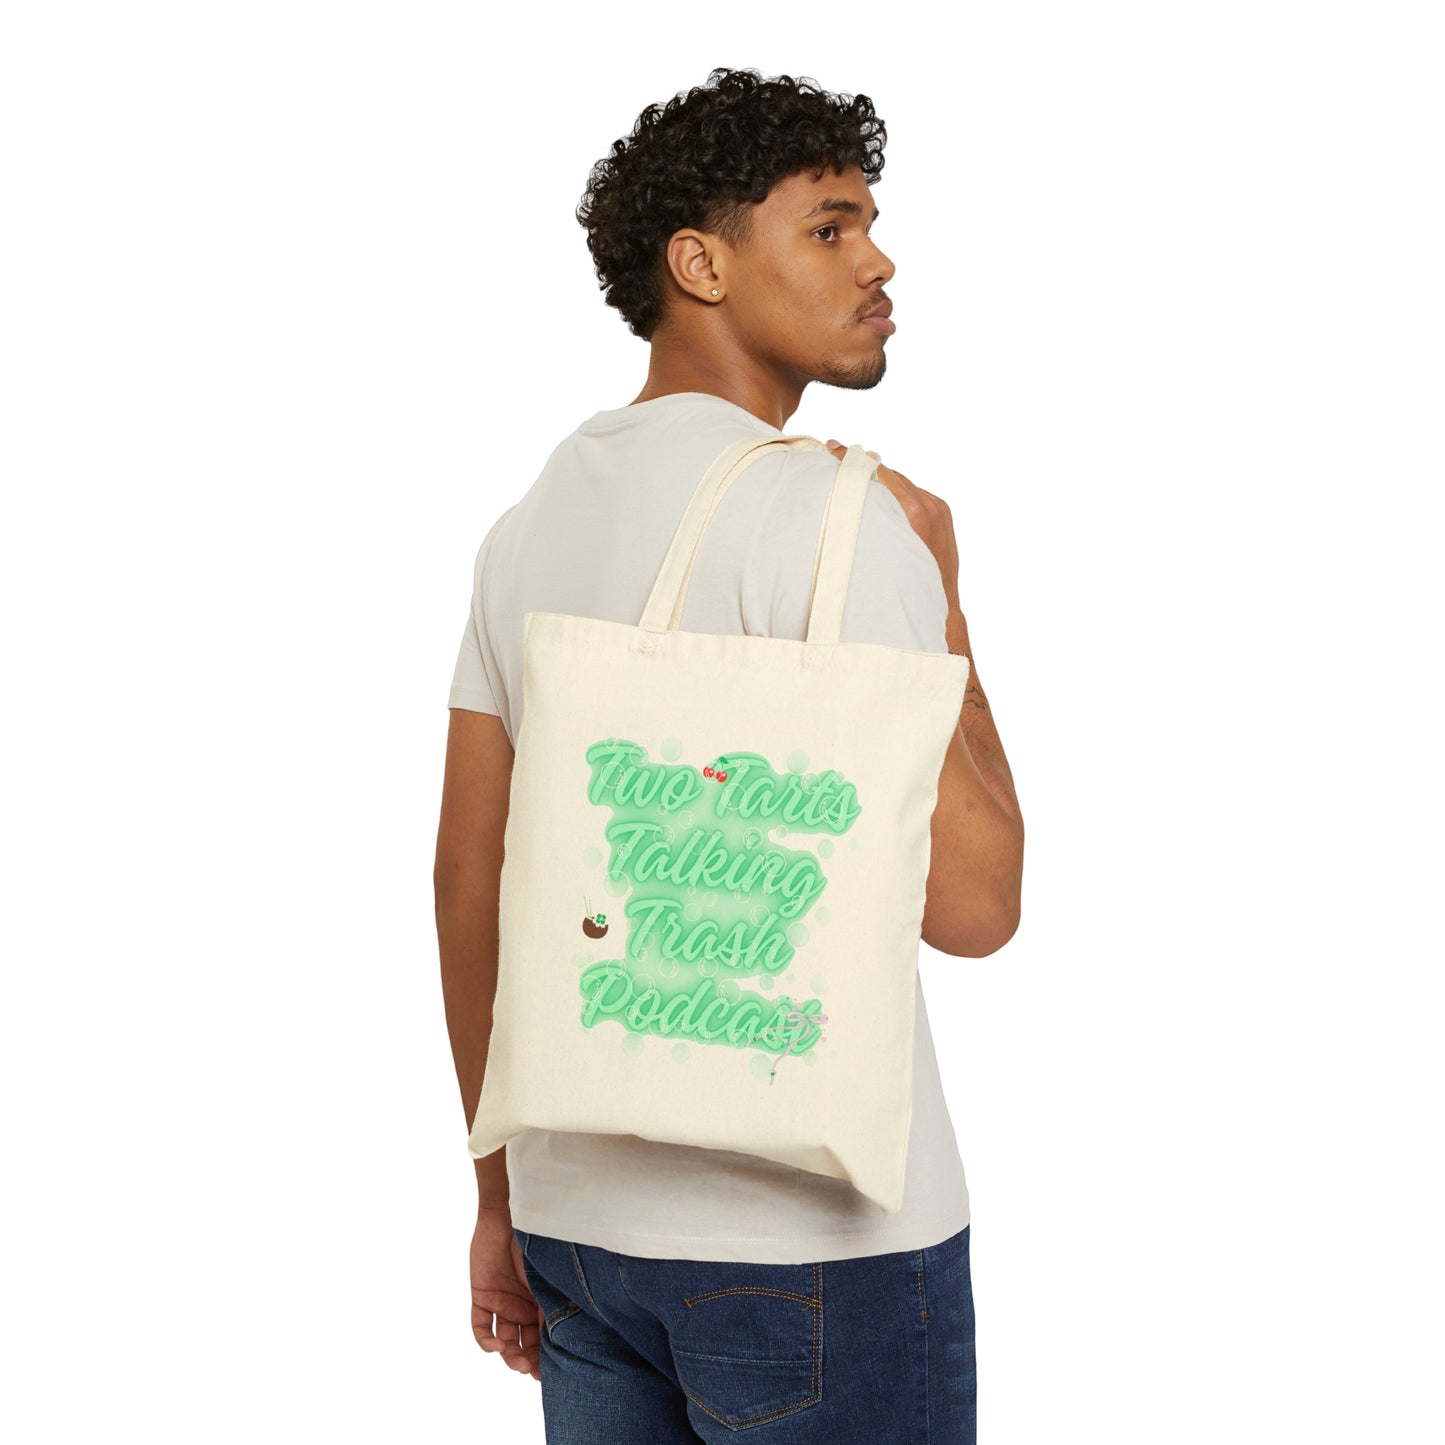 Two Tarts Talking Trash Podcast Green Bubble Cotton Canvas Tote Bag